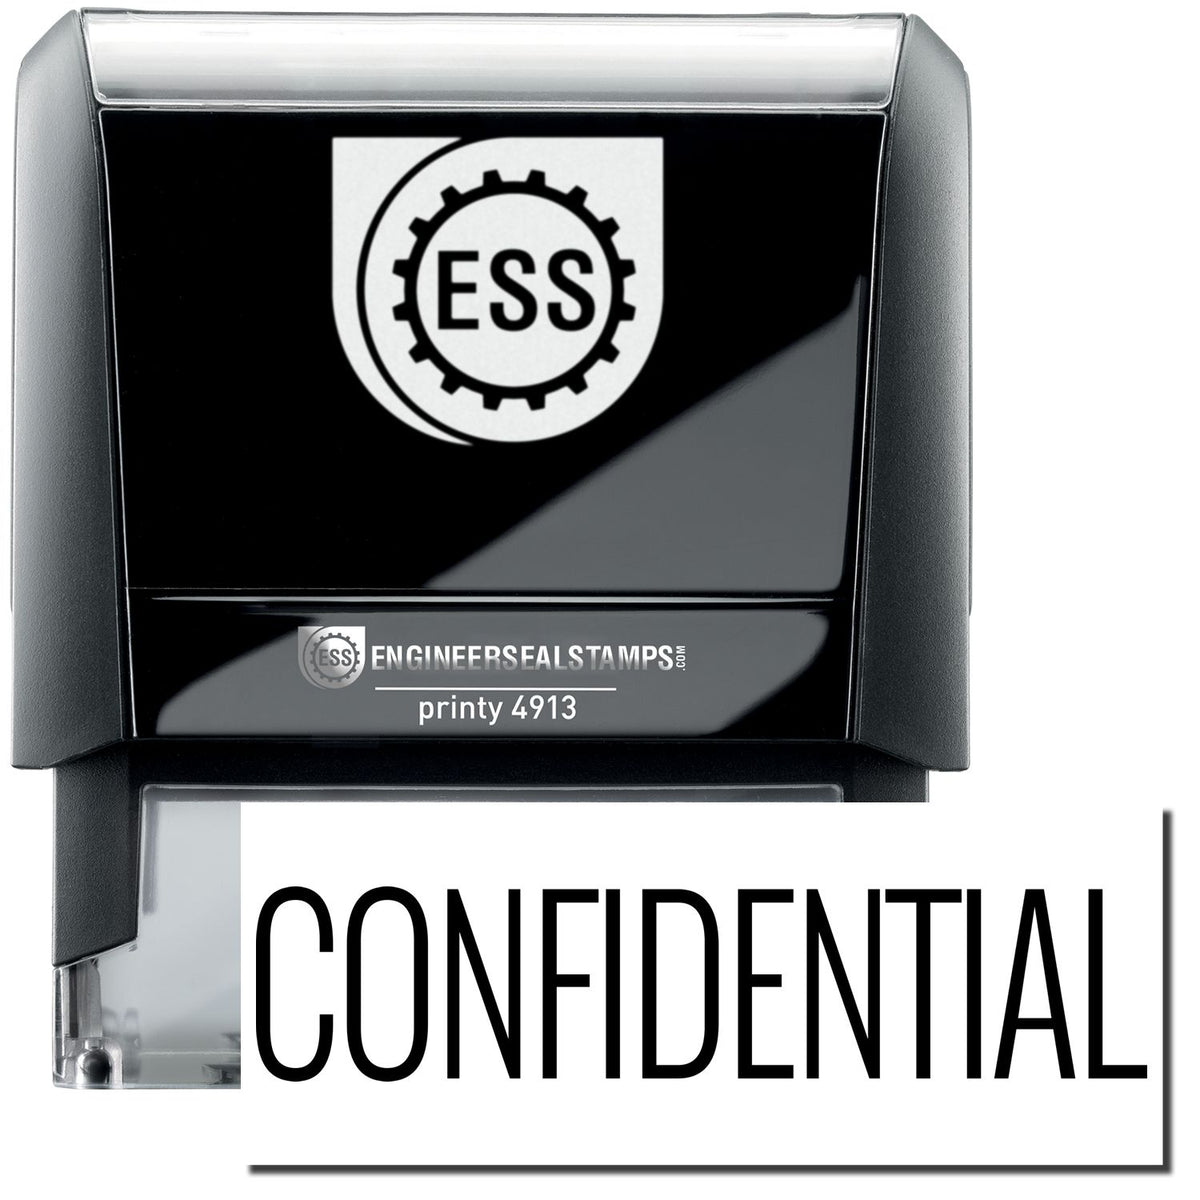 A self-inking stamp with a stamped image showing how the text &quot;CONFIDENTIAL&quot; in a large narrow font is displayed by it after stamping.